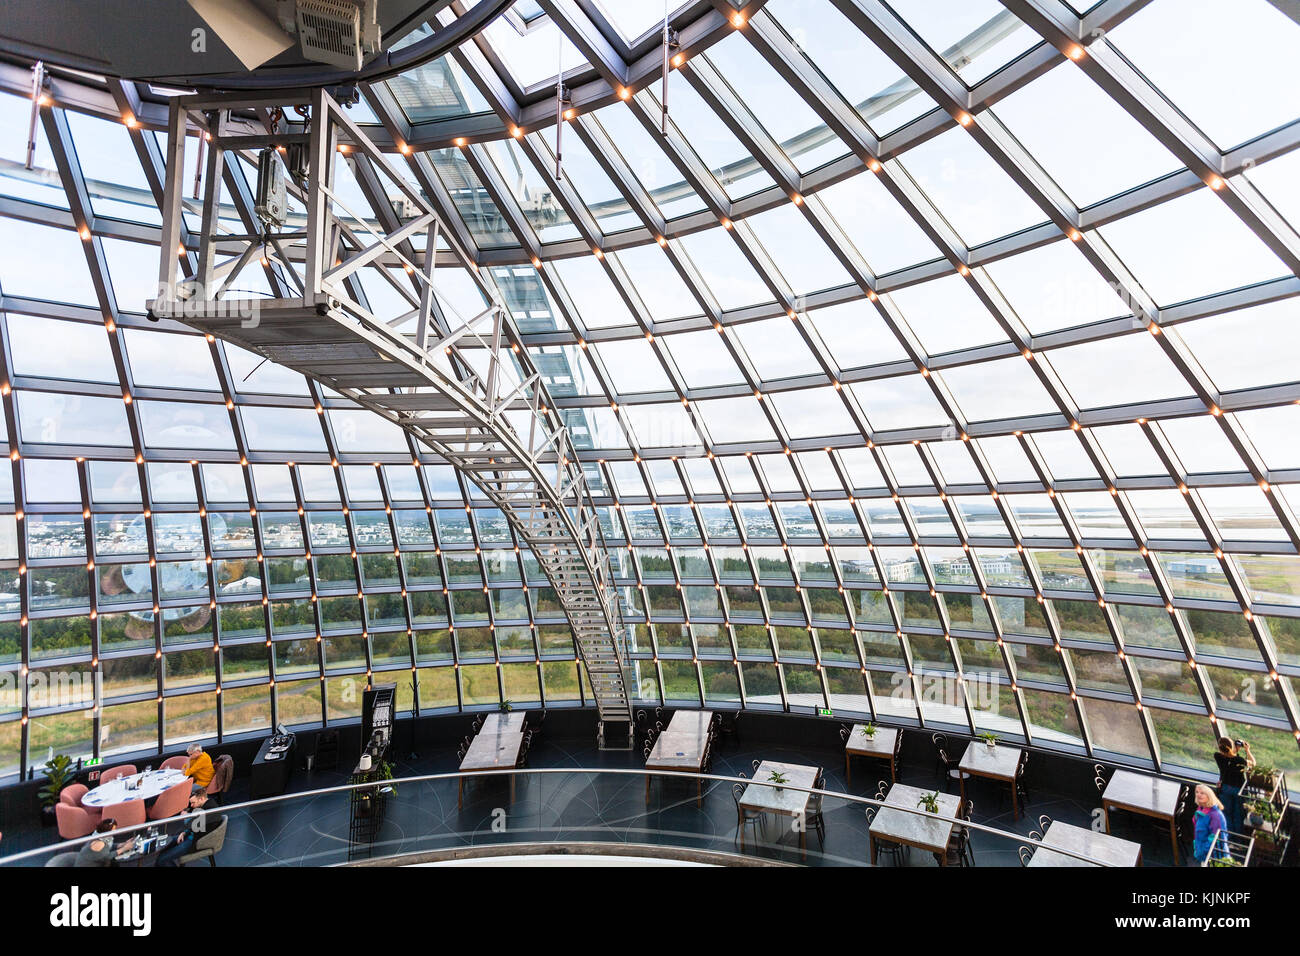 REYKJAVIC, ICELAND - SEPTEMBER 7, 2017: visitors inside glass dome on Observation Deck of Perlan Museum in Reykjavik city in evening. The Perlan Museu Stock Photo